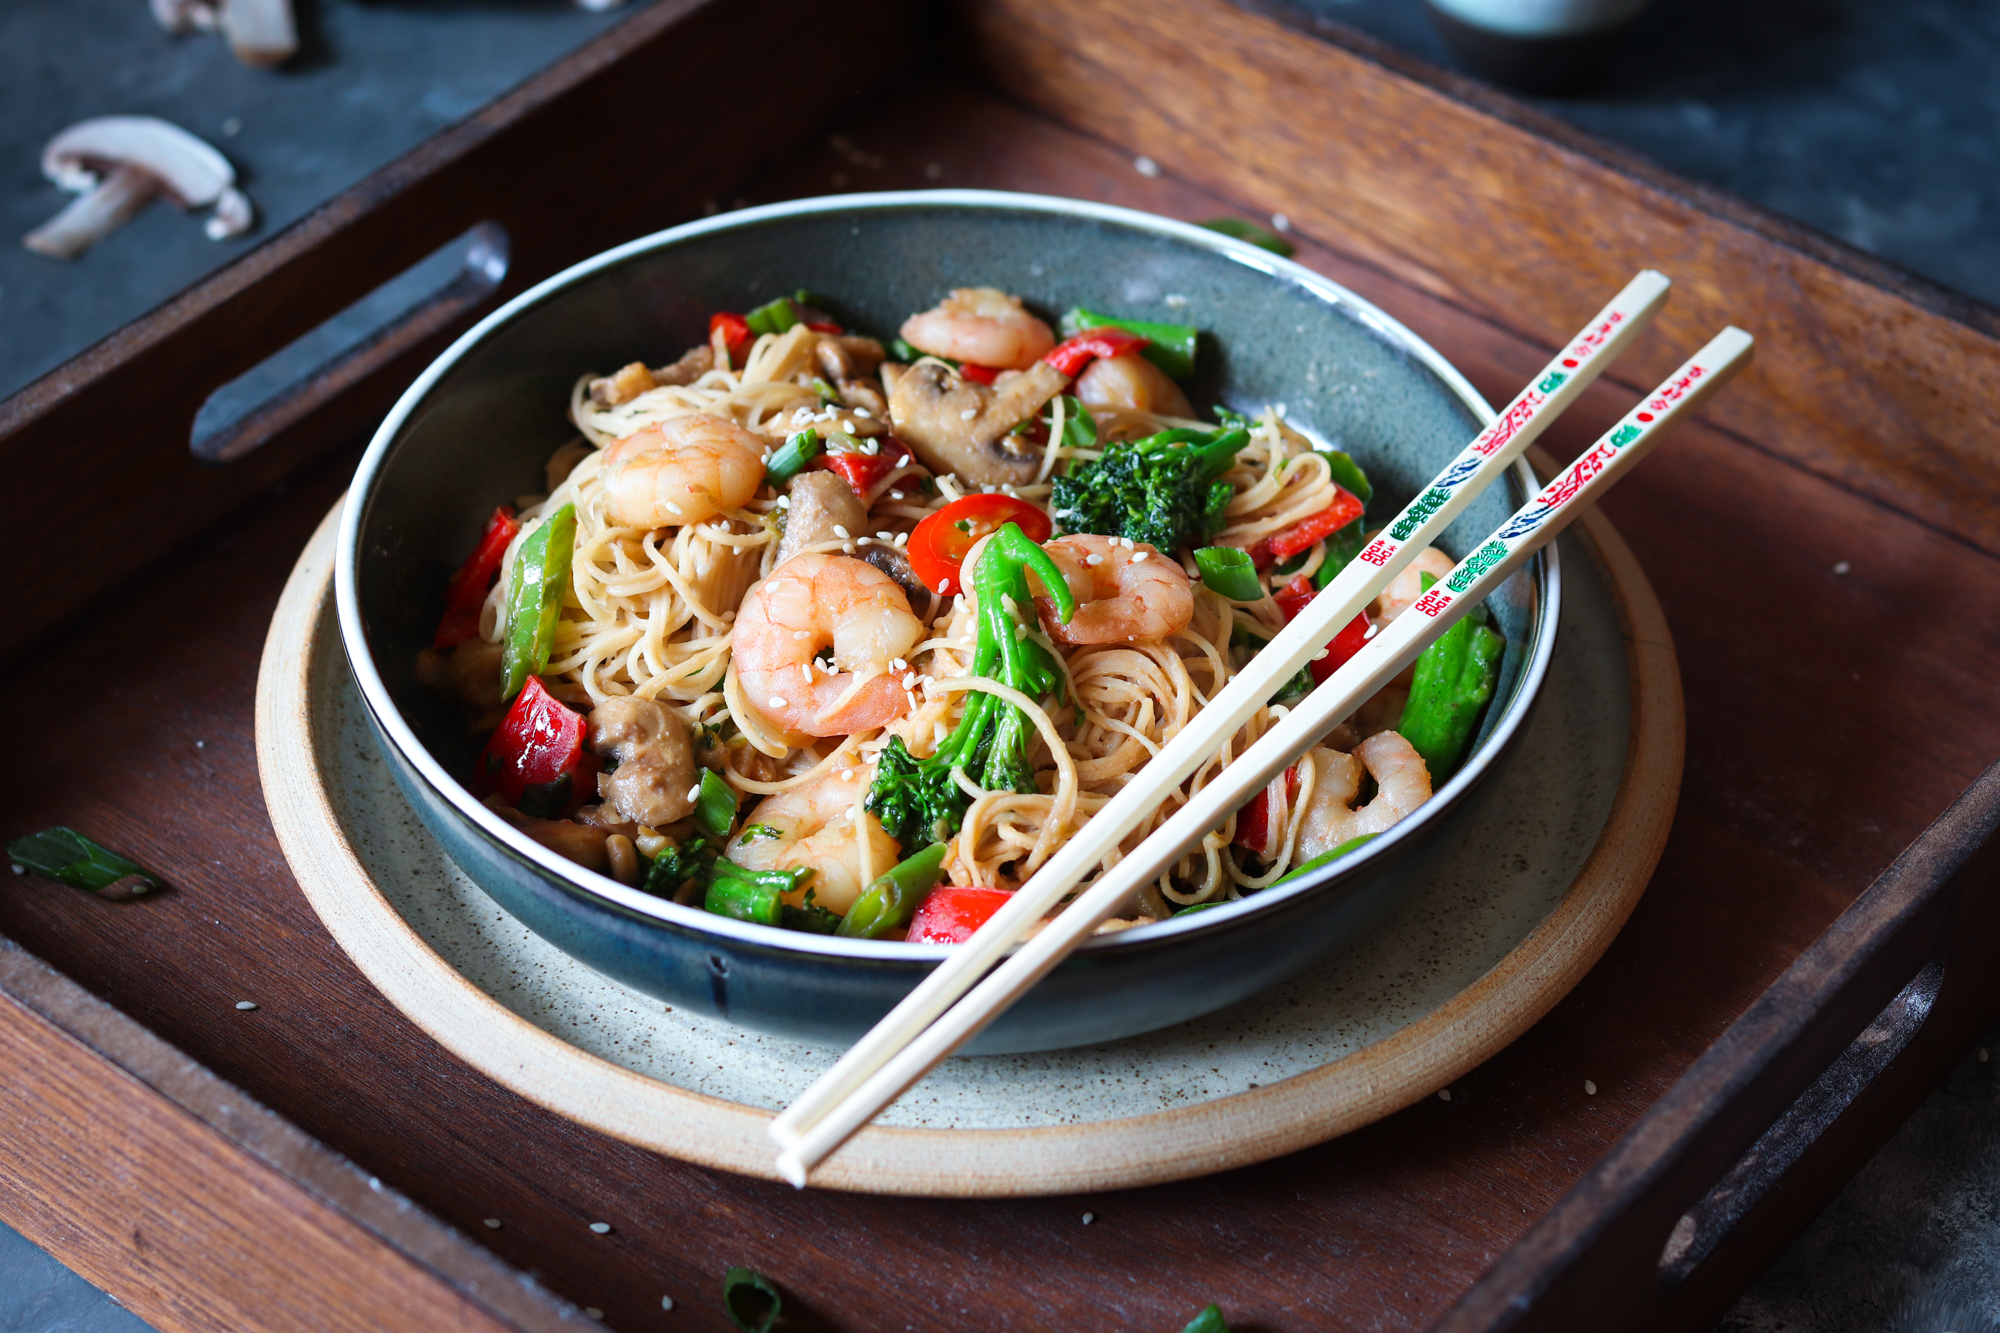 Miso prawns and mixed veggie noodles